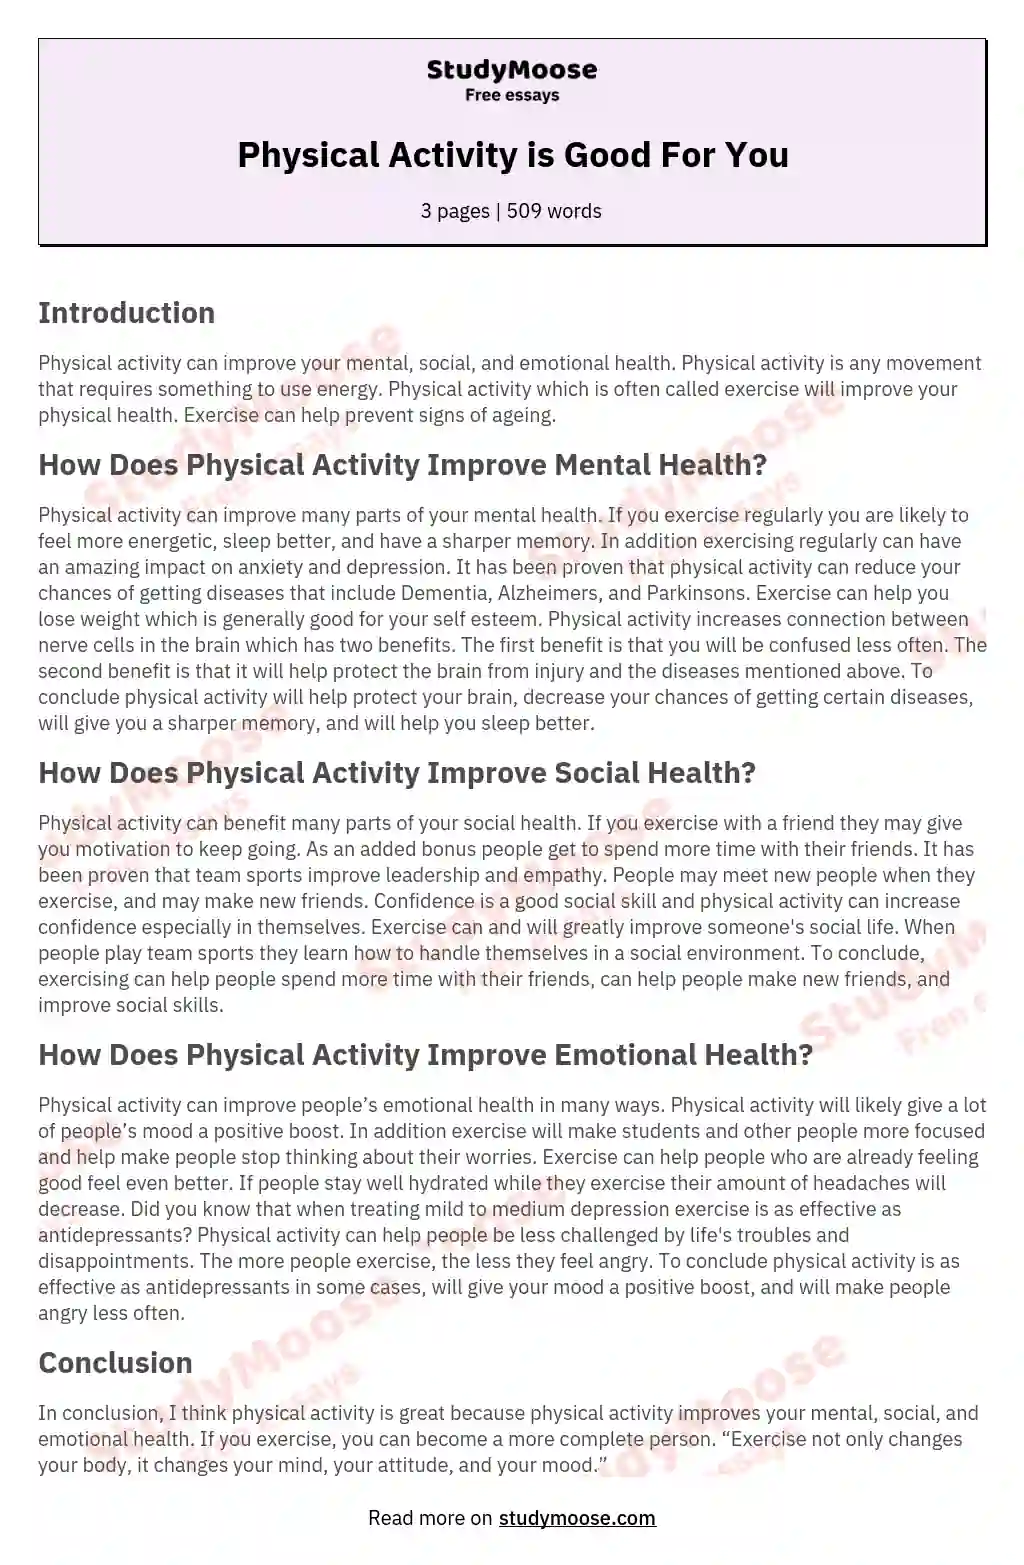 essay writing about physical activity